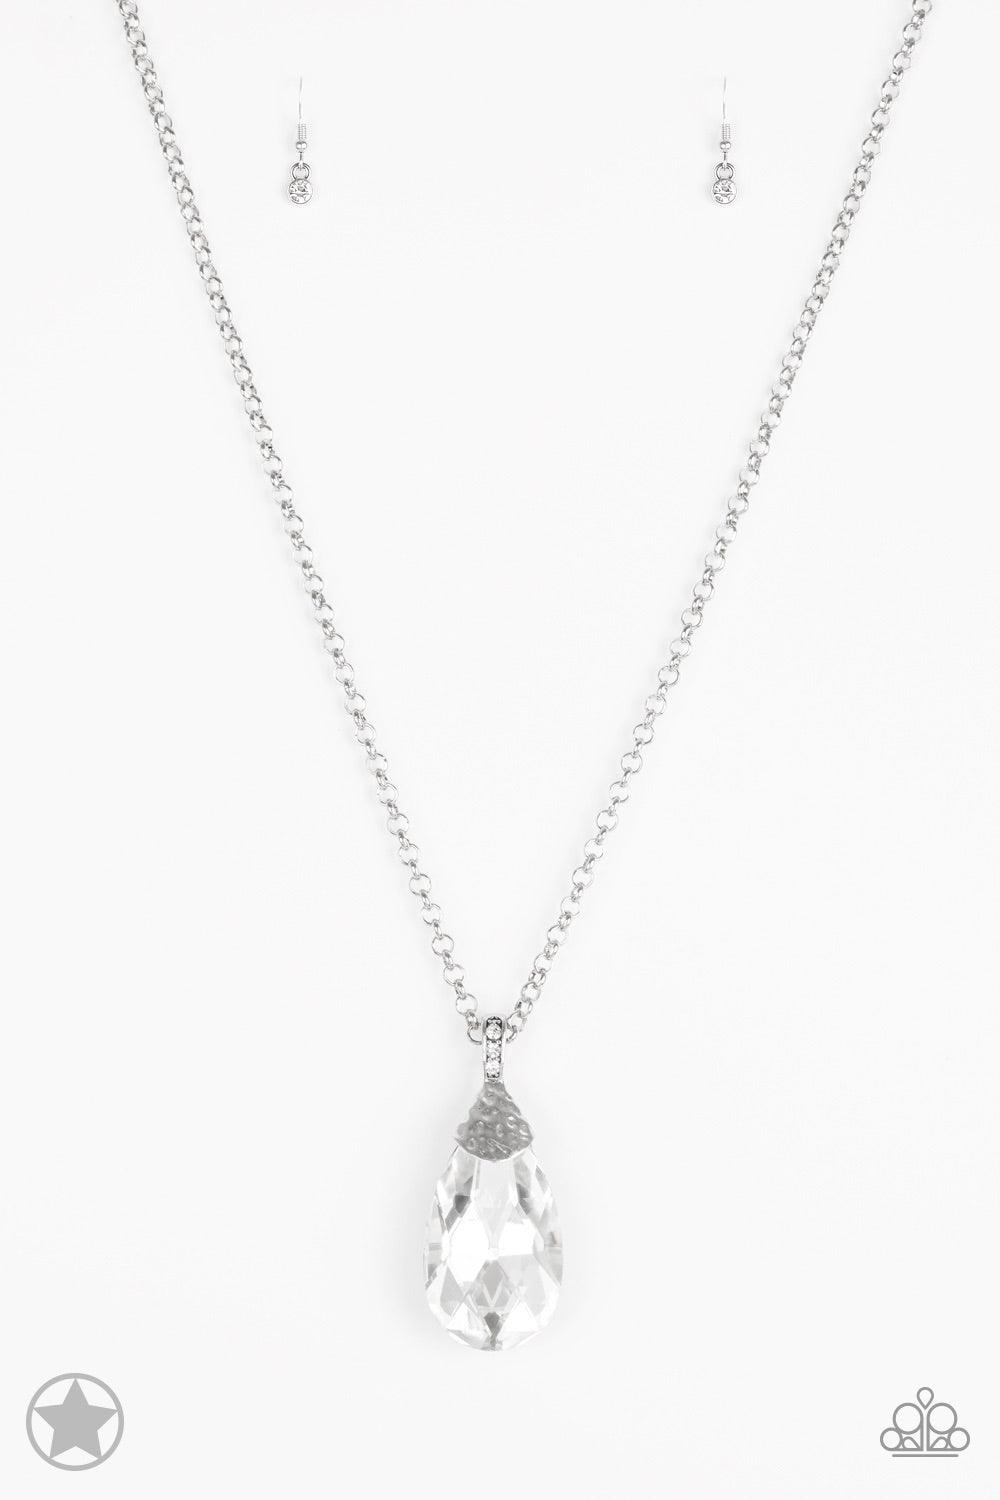 Paparazzi Accessories Spellbinding Sparkle - White Infused with an elegantly elongated silver chain, a dramatic teardrop gem swings from the bottom of a white rhinestone encrusted silver fitting, creating a hypnotic pendant. Features an adjustable clasp c